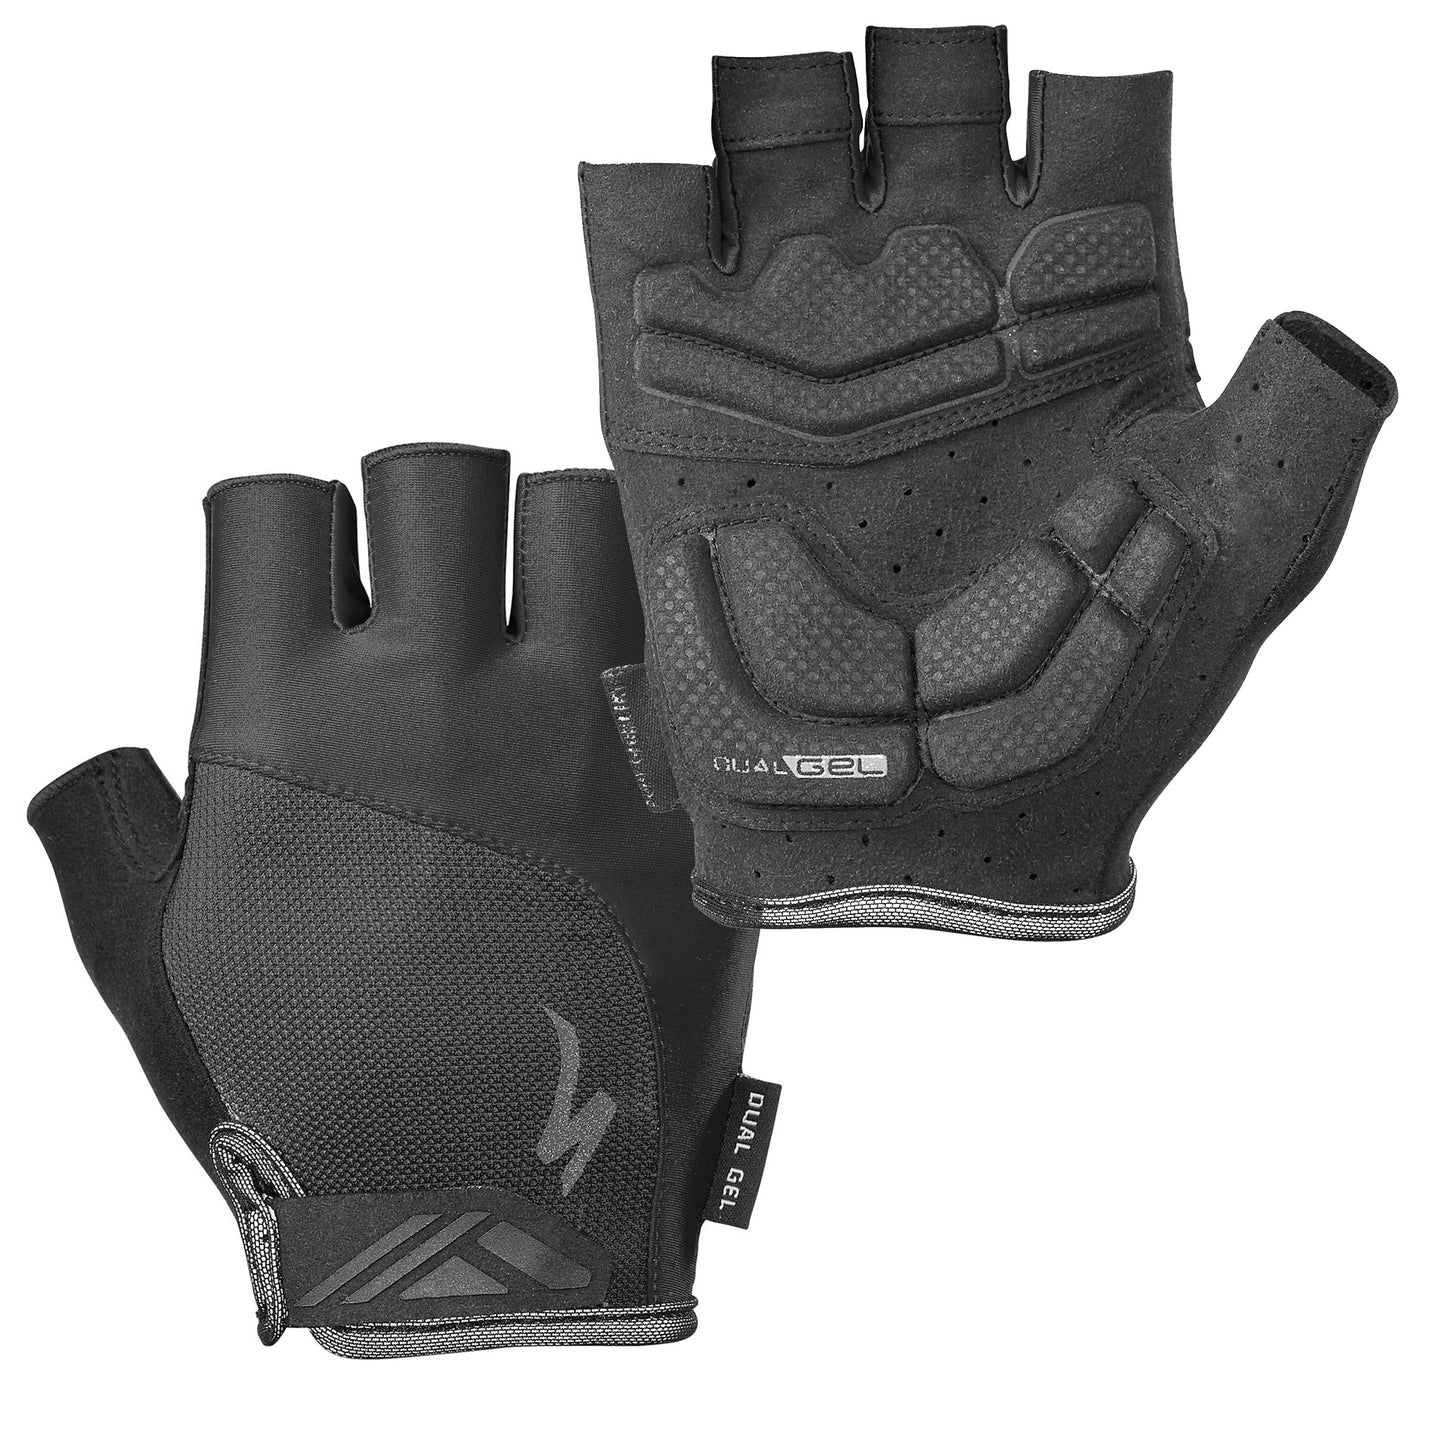 Specialized Mens Body Geometry Dual Gel Cycling Gloves buy online